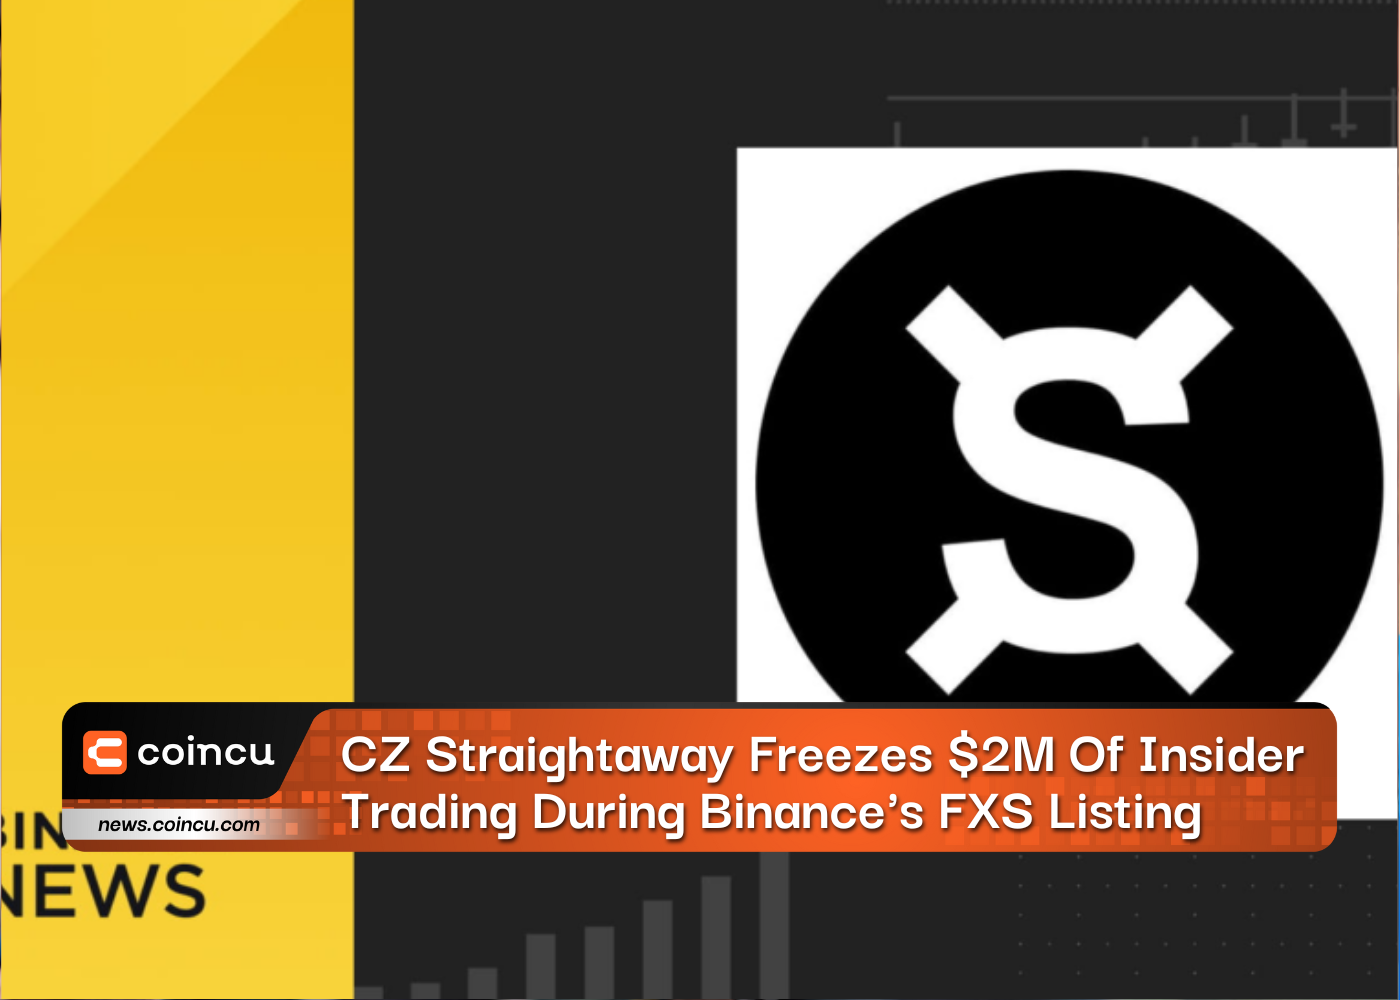 CZ Straightaway Freezes $2M Of Insider Trading During Binance's FXS Listing